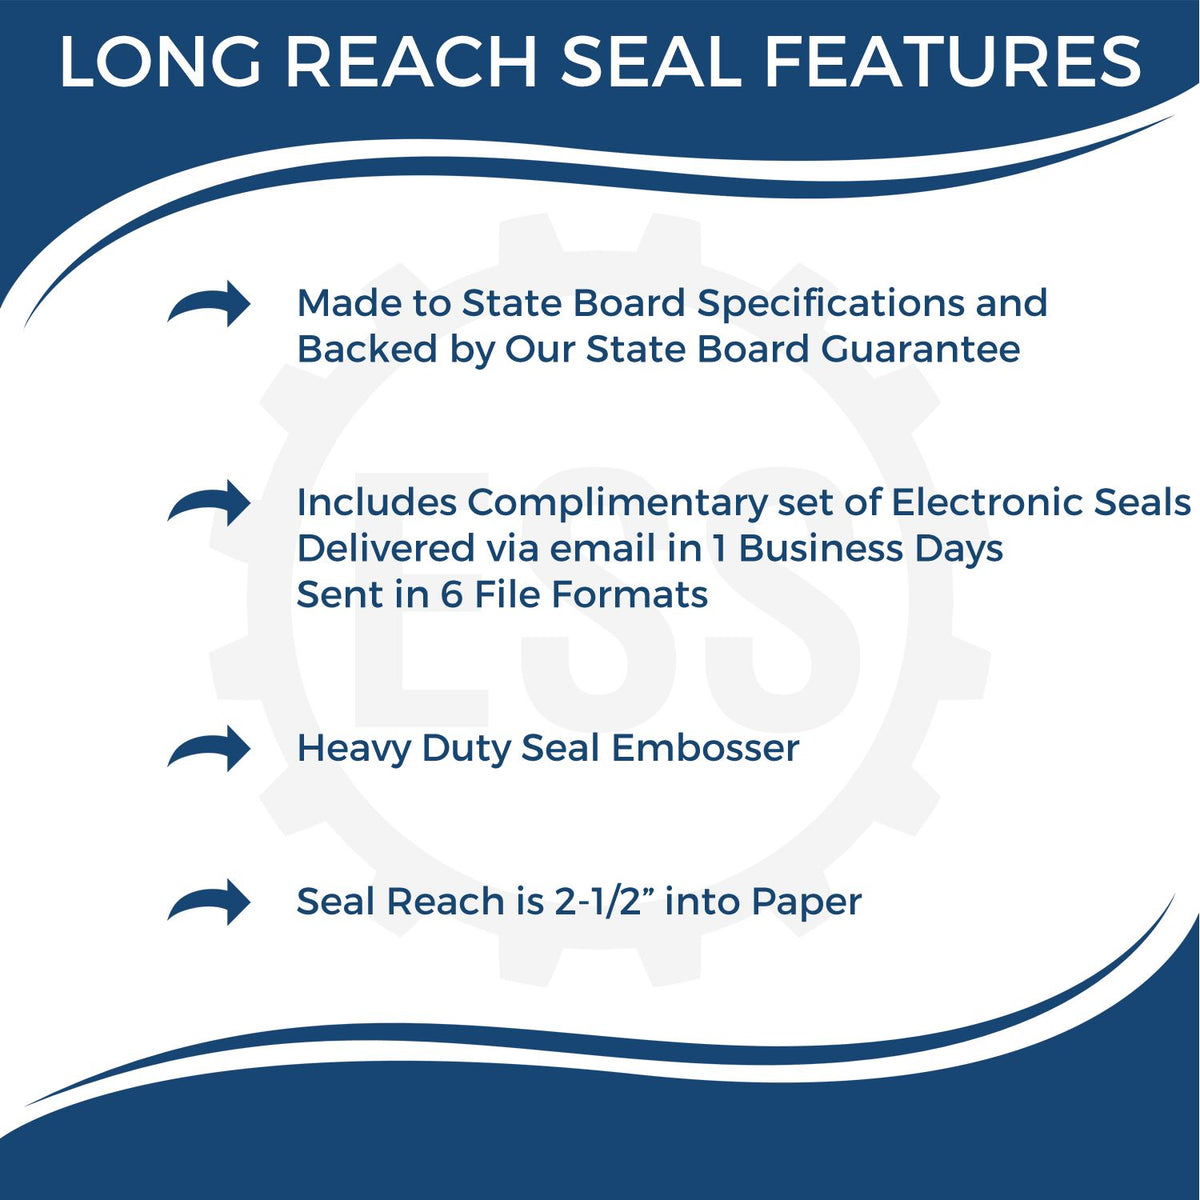 A picture of an infographic highlighting the selling points for the Long Reach Alabama PE Seal